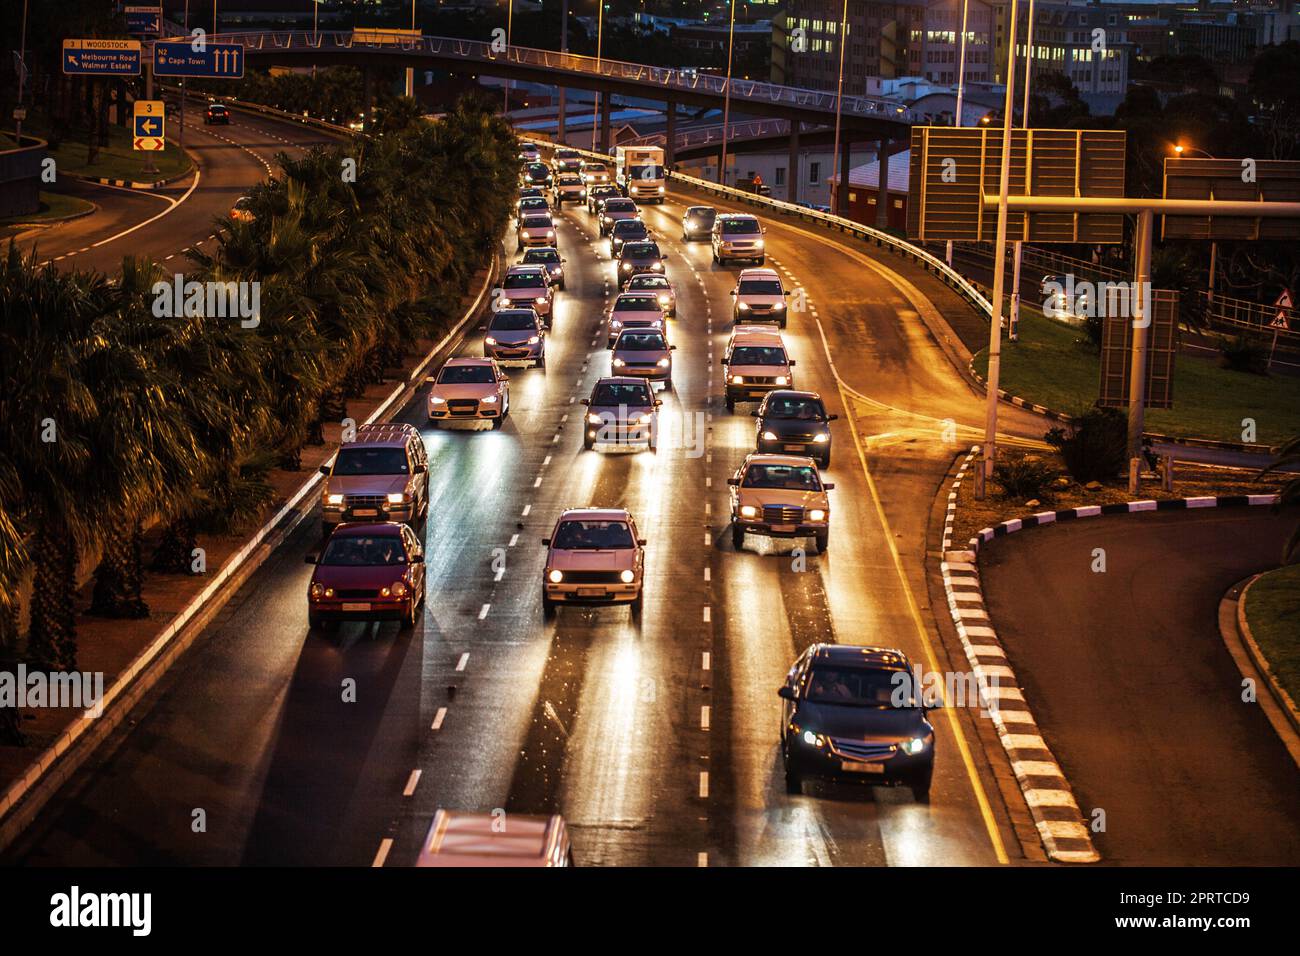 This city never sleeps. bumber-to-bumper traffic on a freeway. Stock Photo